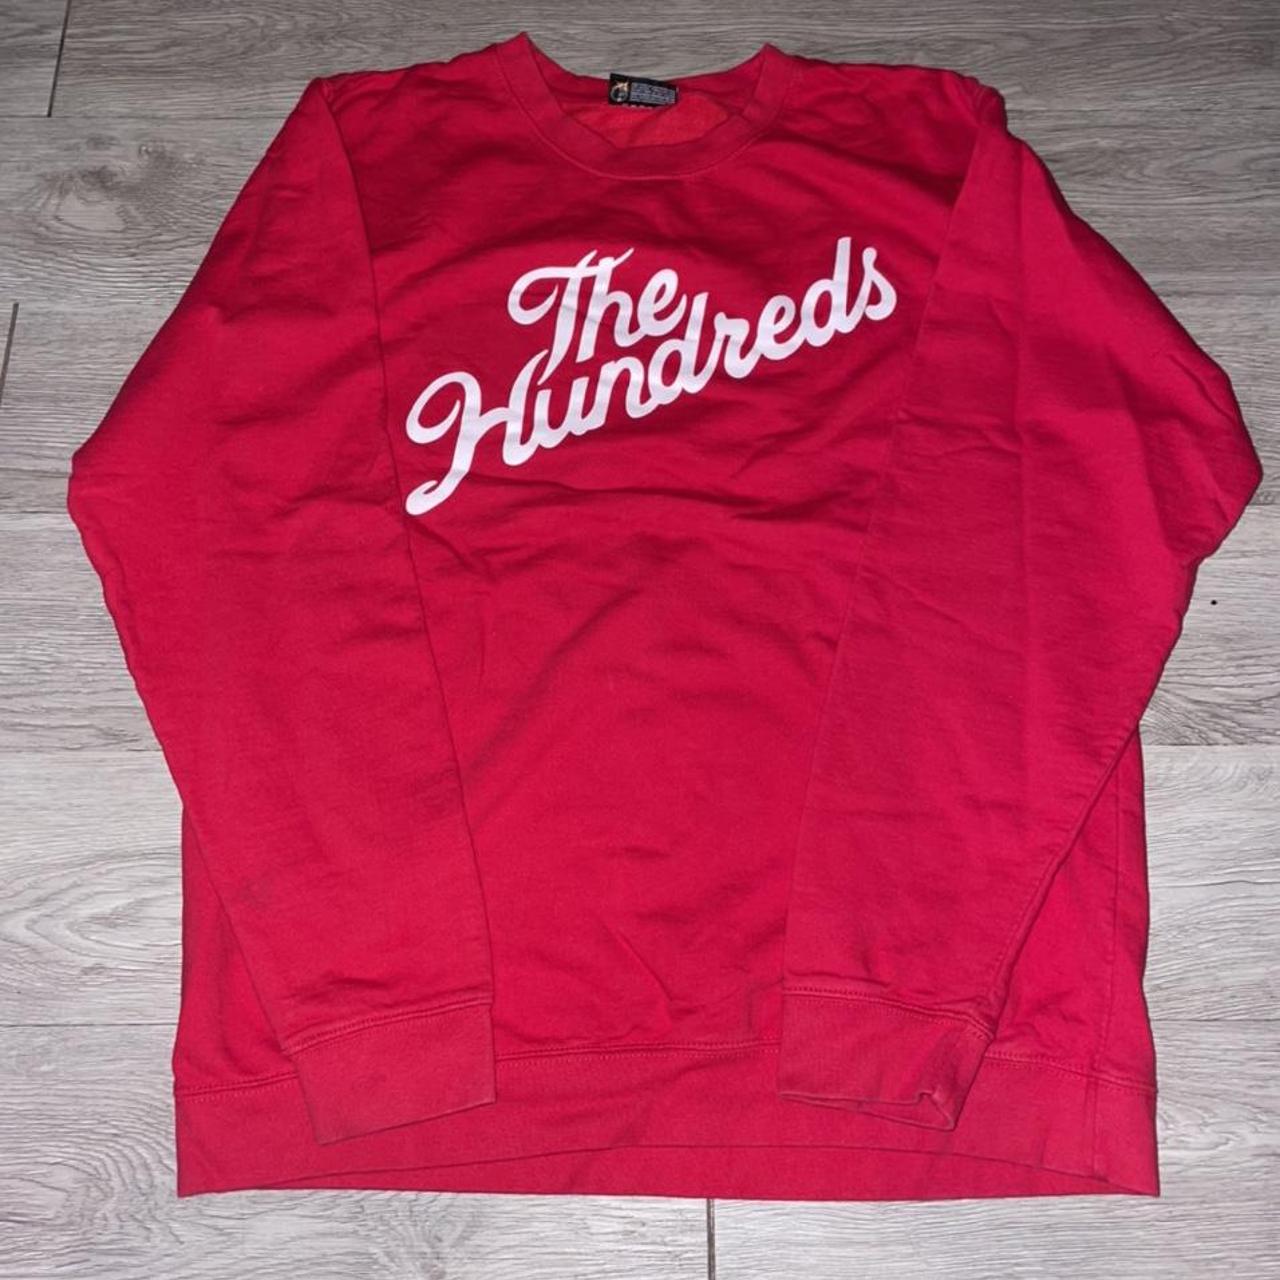 The Hundreds Men's Red and White Sweatshirt